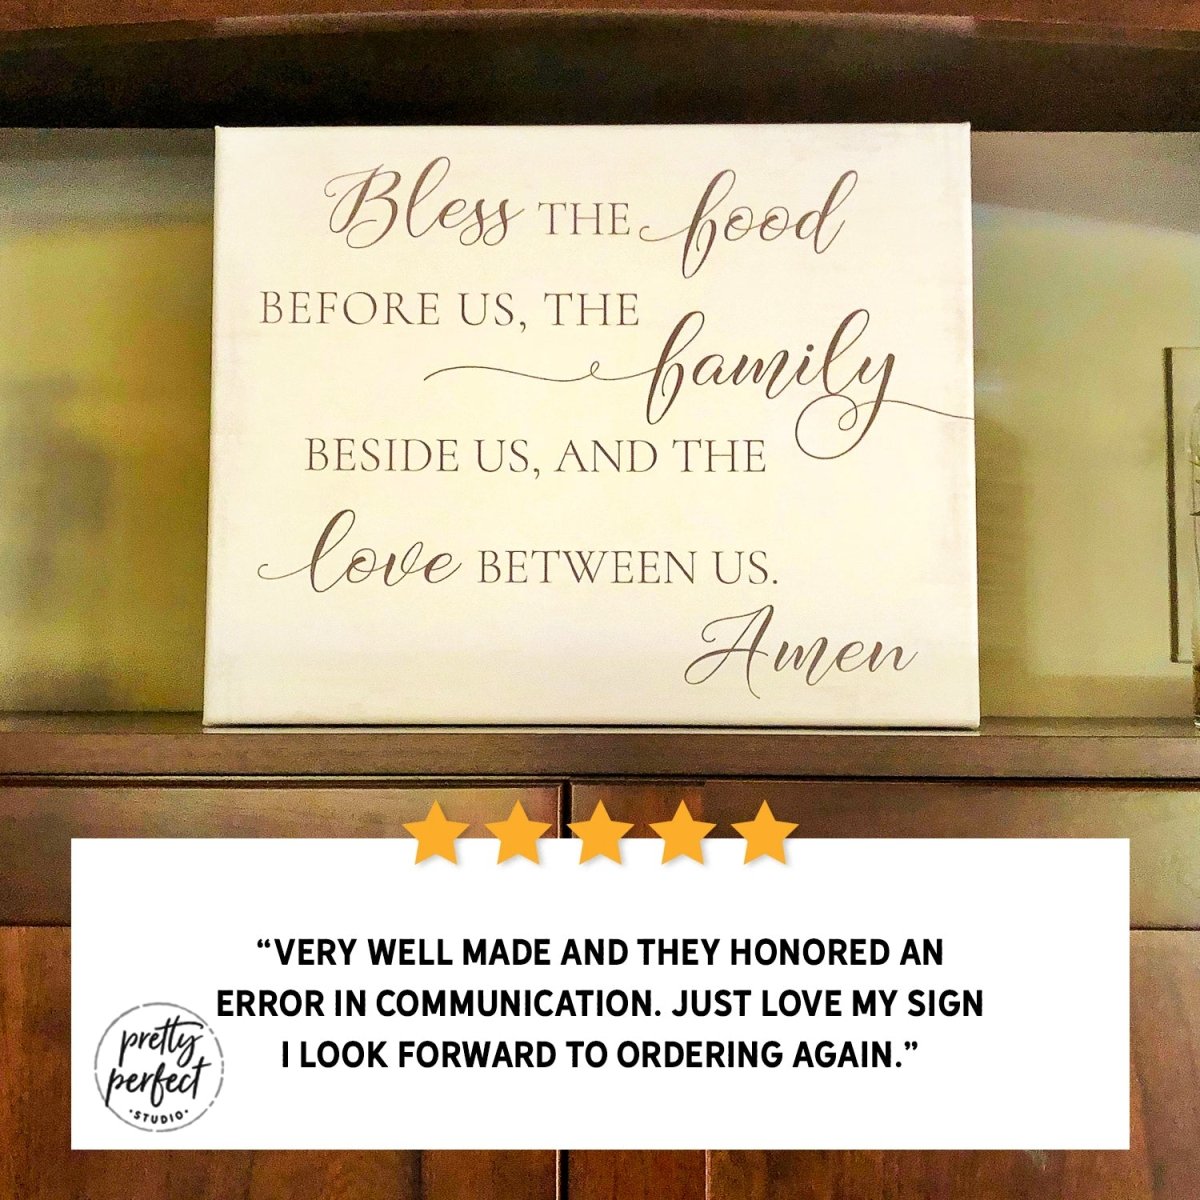 Customer product review for bless the food before us sign by Pretty Perfect Studio